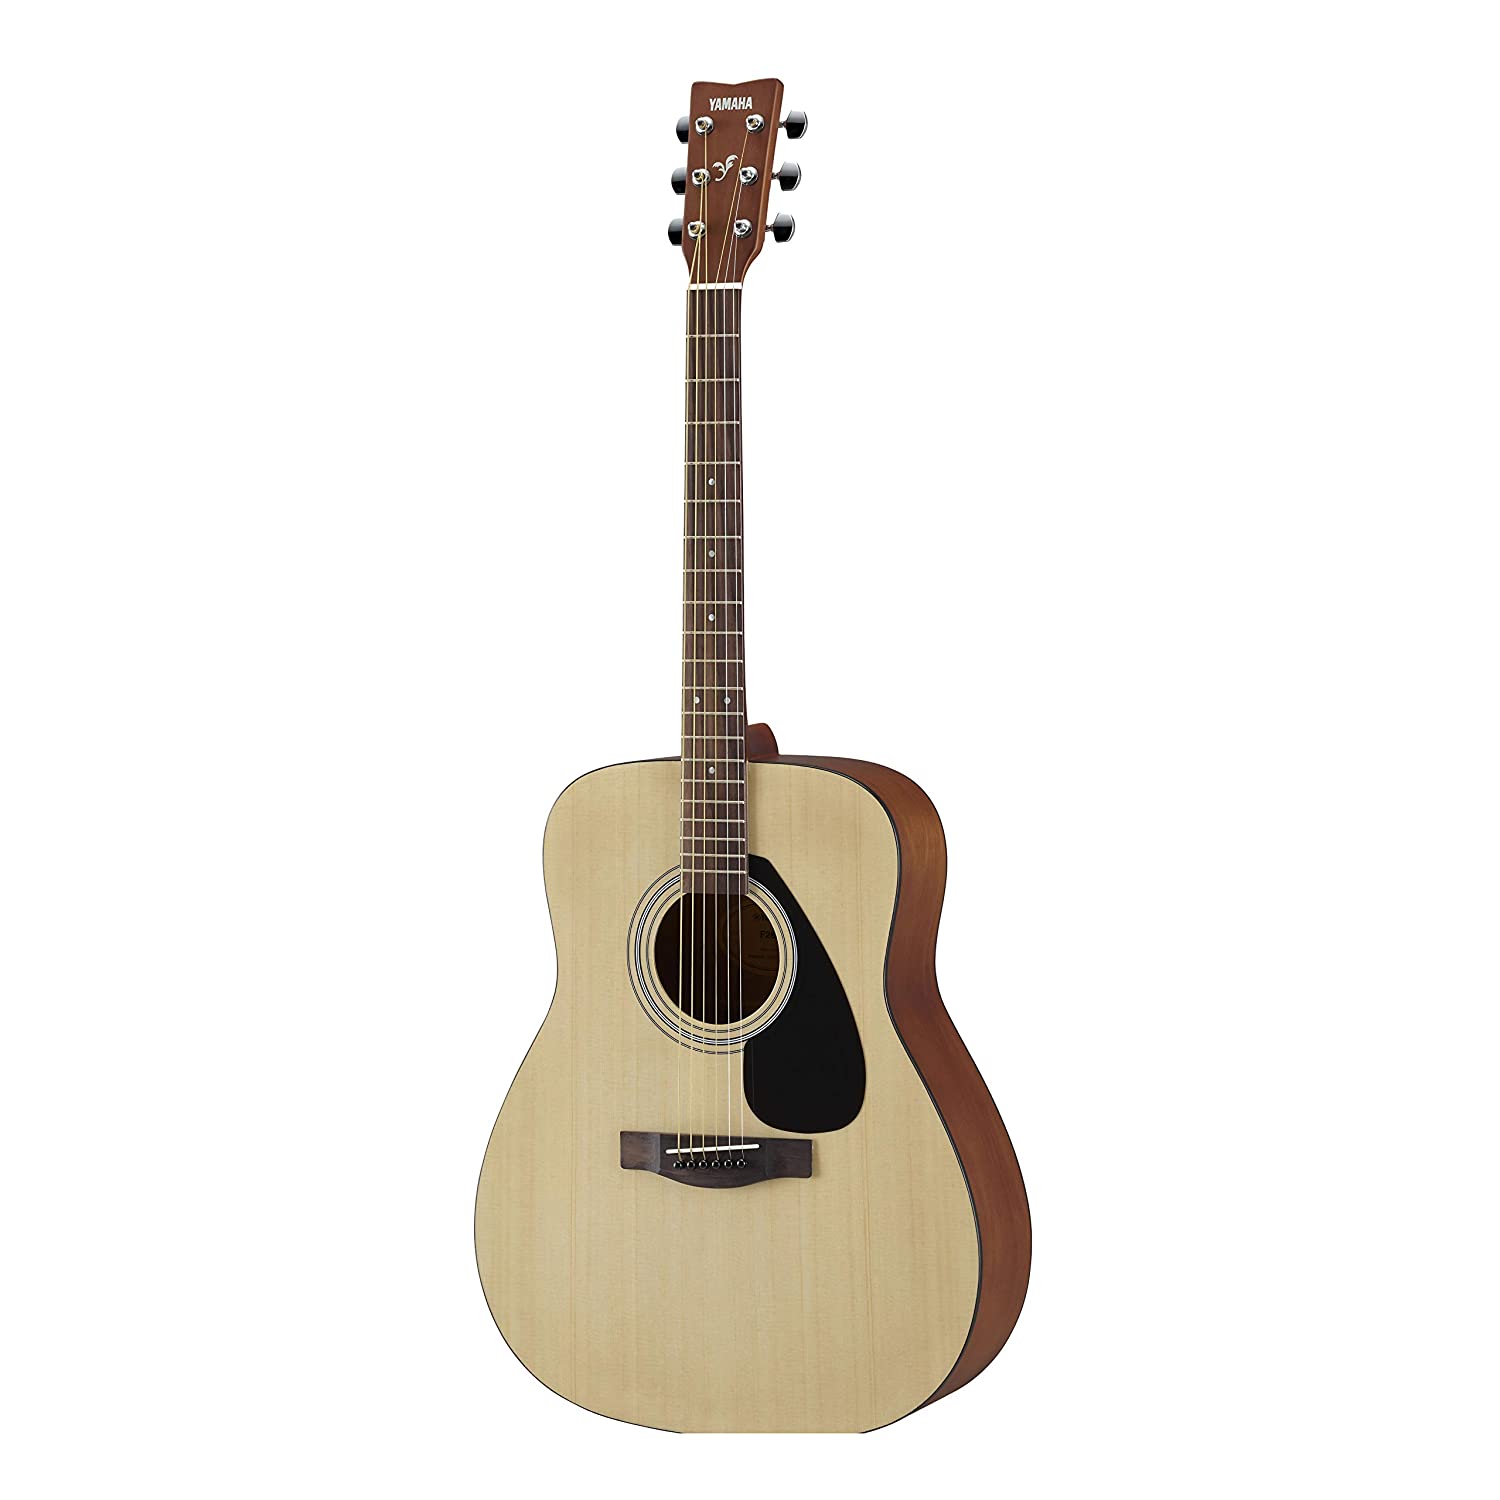 Yamaha F280 acoustic guitar for beginner online price in India